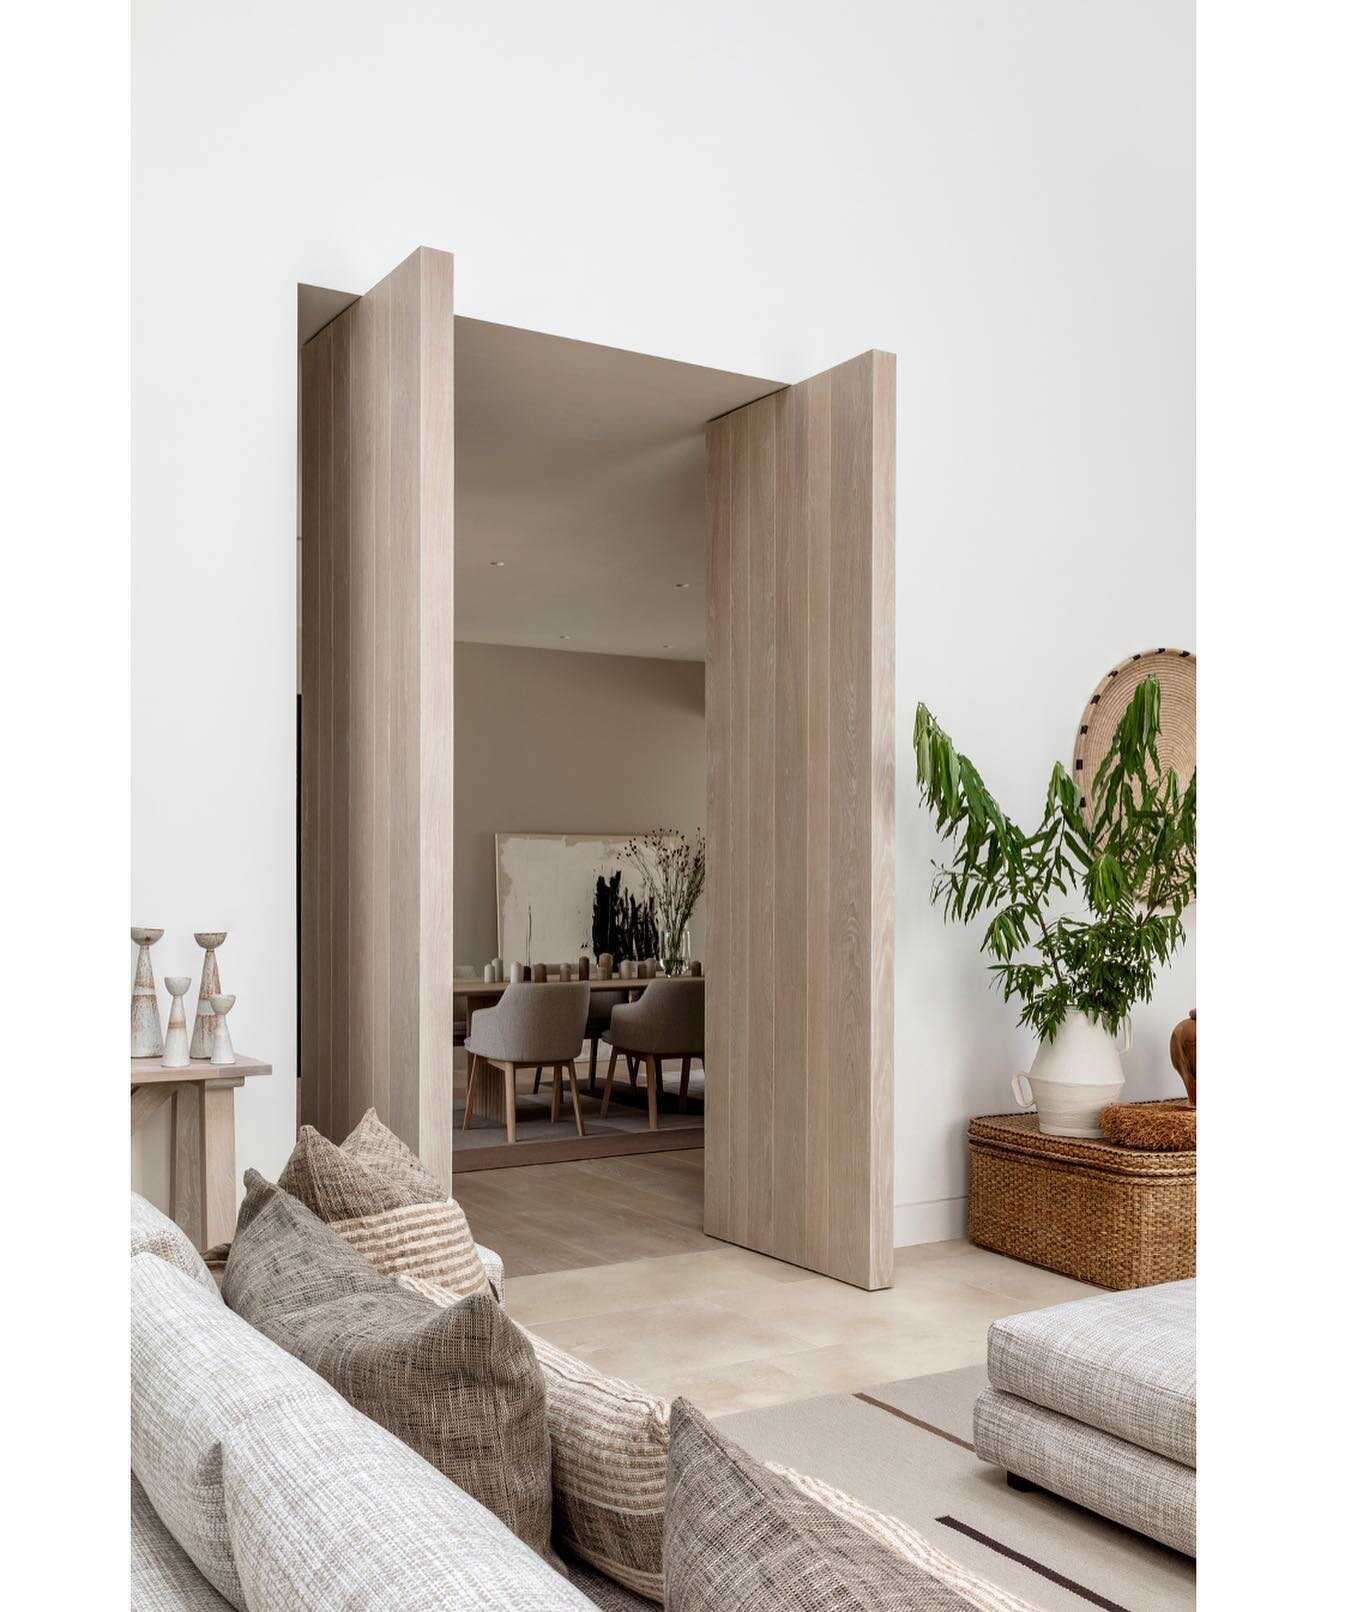 We added tall timber pivot doors which when open allow this country house to have a relaxed open plan feeling and when closed create more private intimate spaces.  The spaces are linked with a calm chalky palate of natural materials @louiseholtdesign